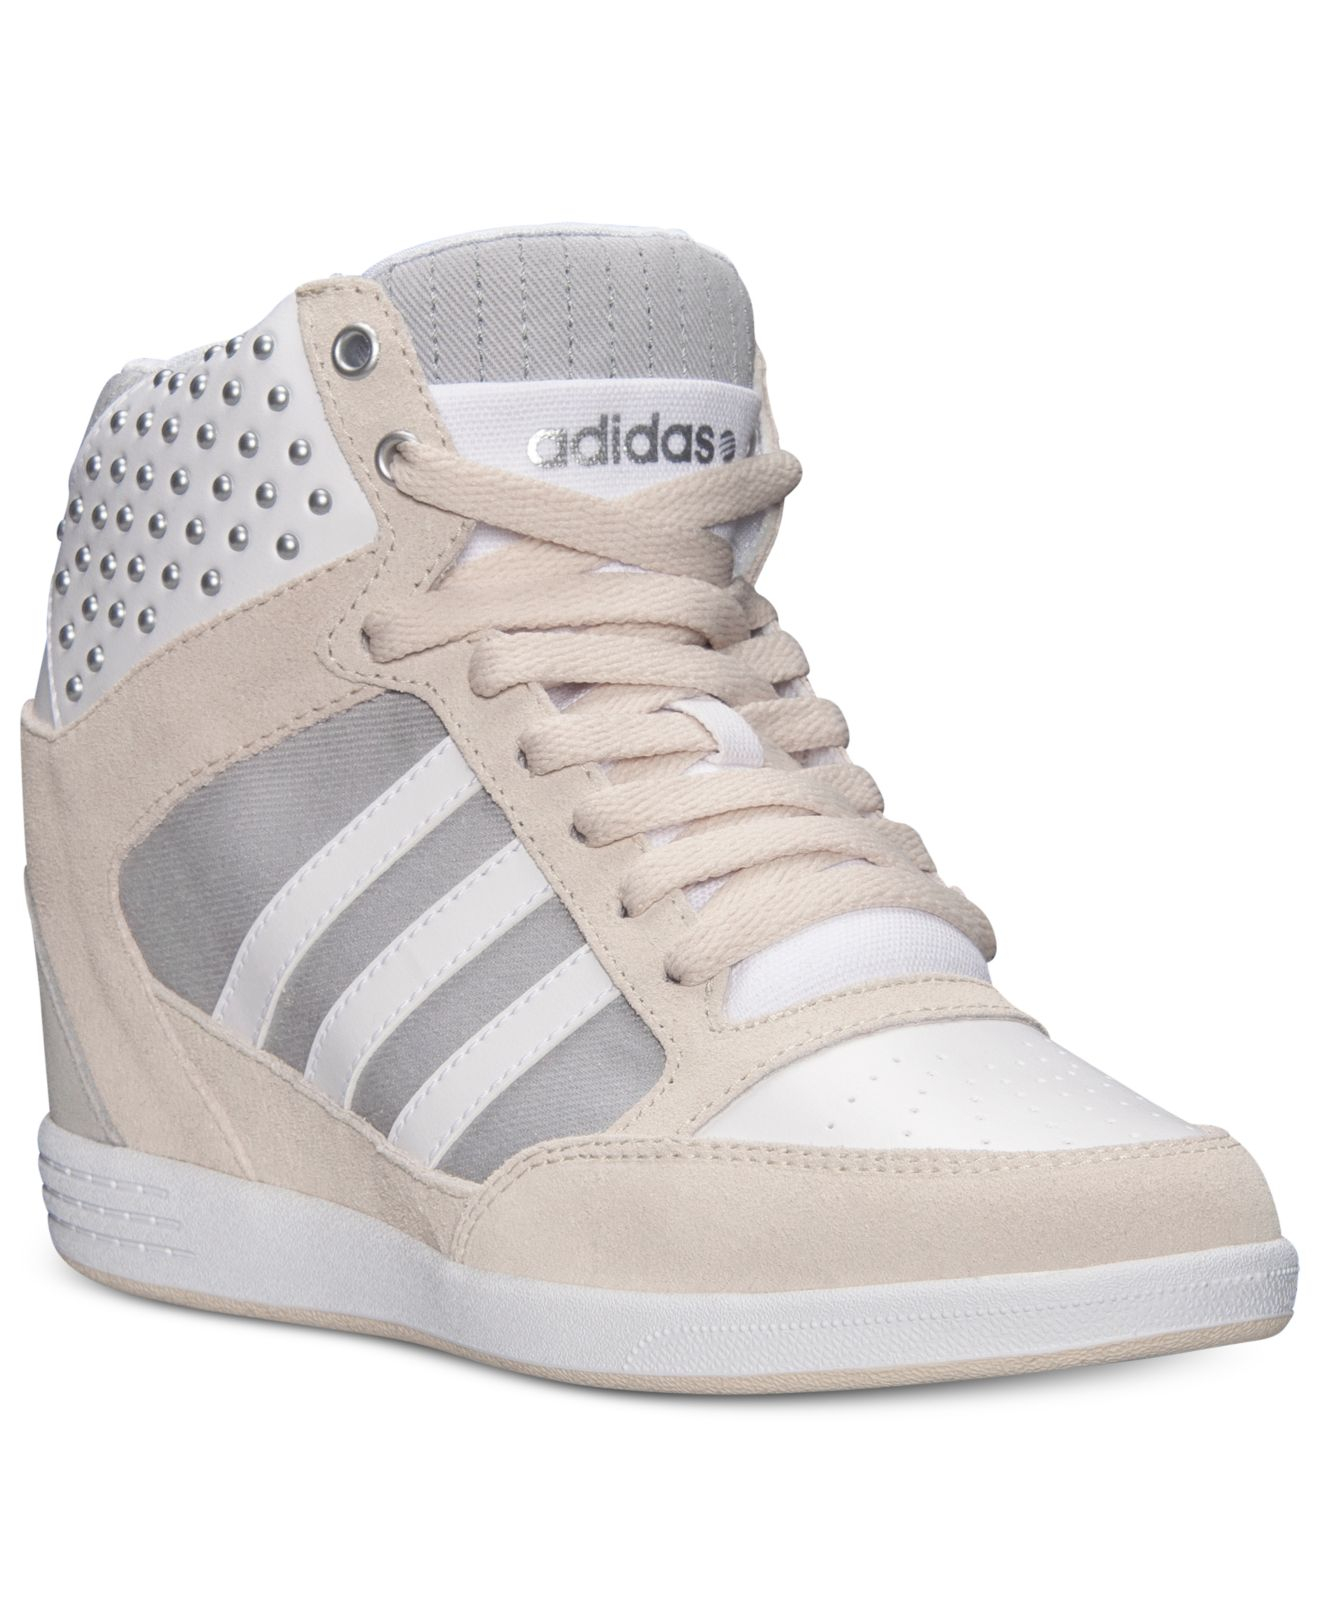 adidas super wedge shoes